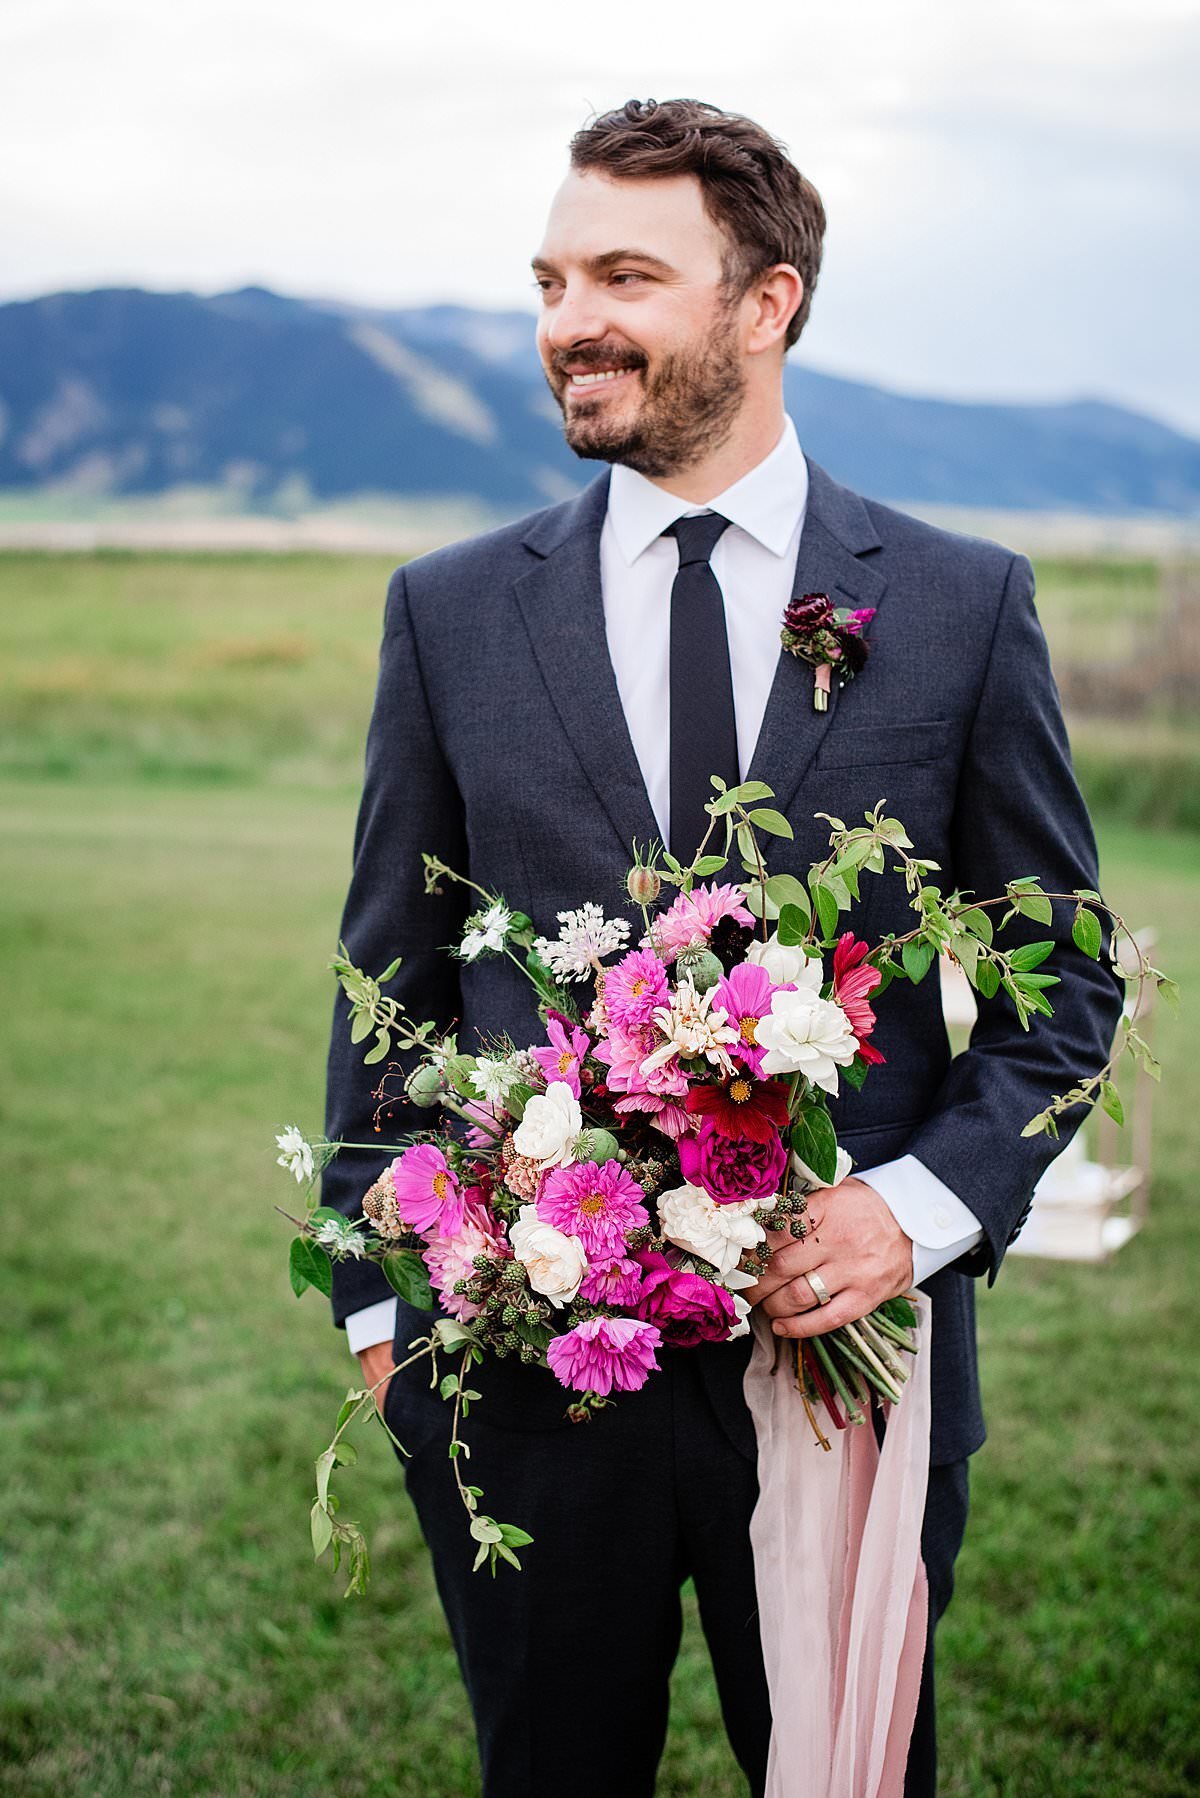 Groom holding large whimsical pink, white and burgundy bouquet wearing a sleek modern suit